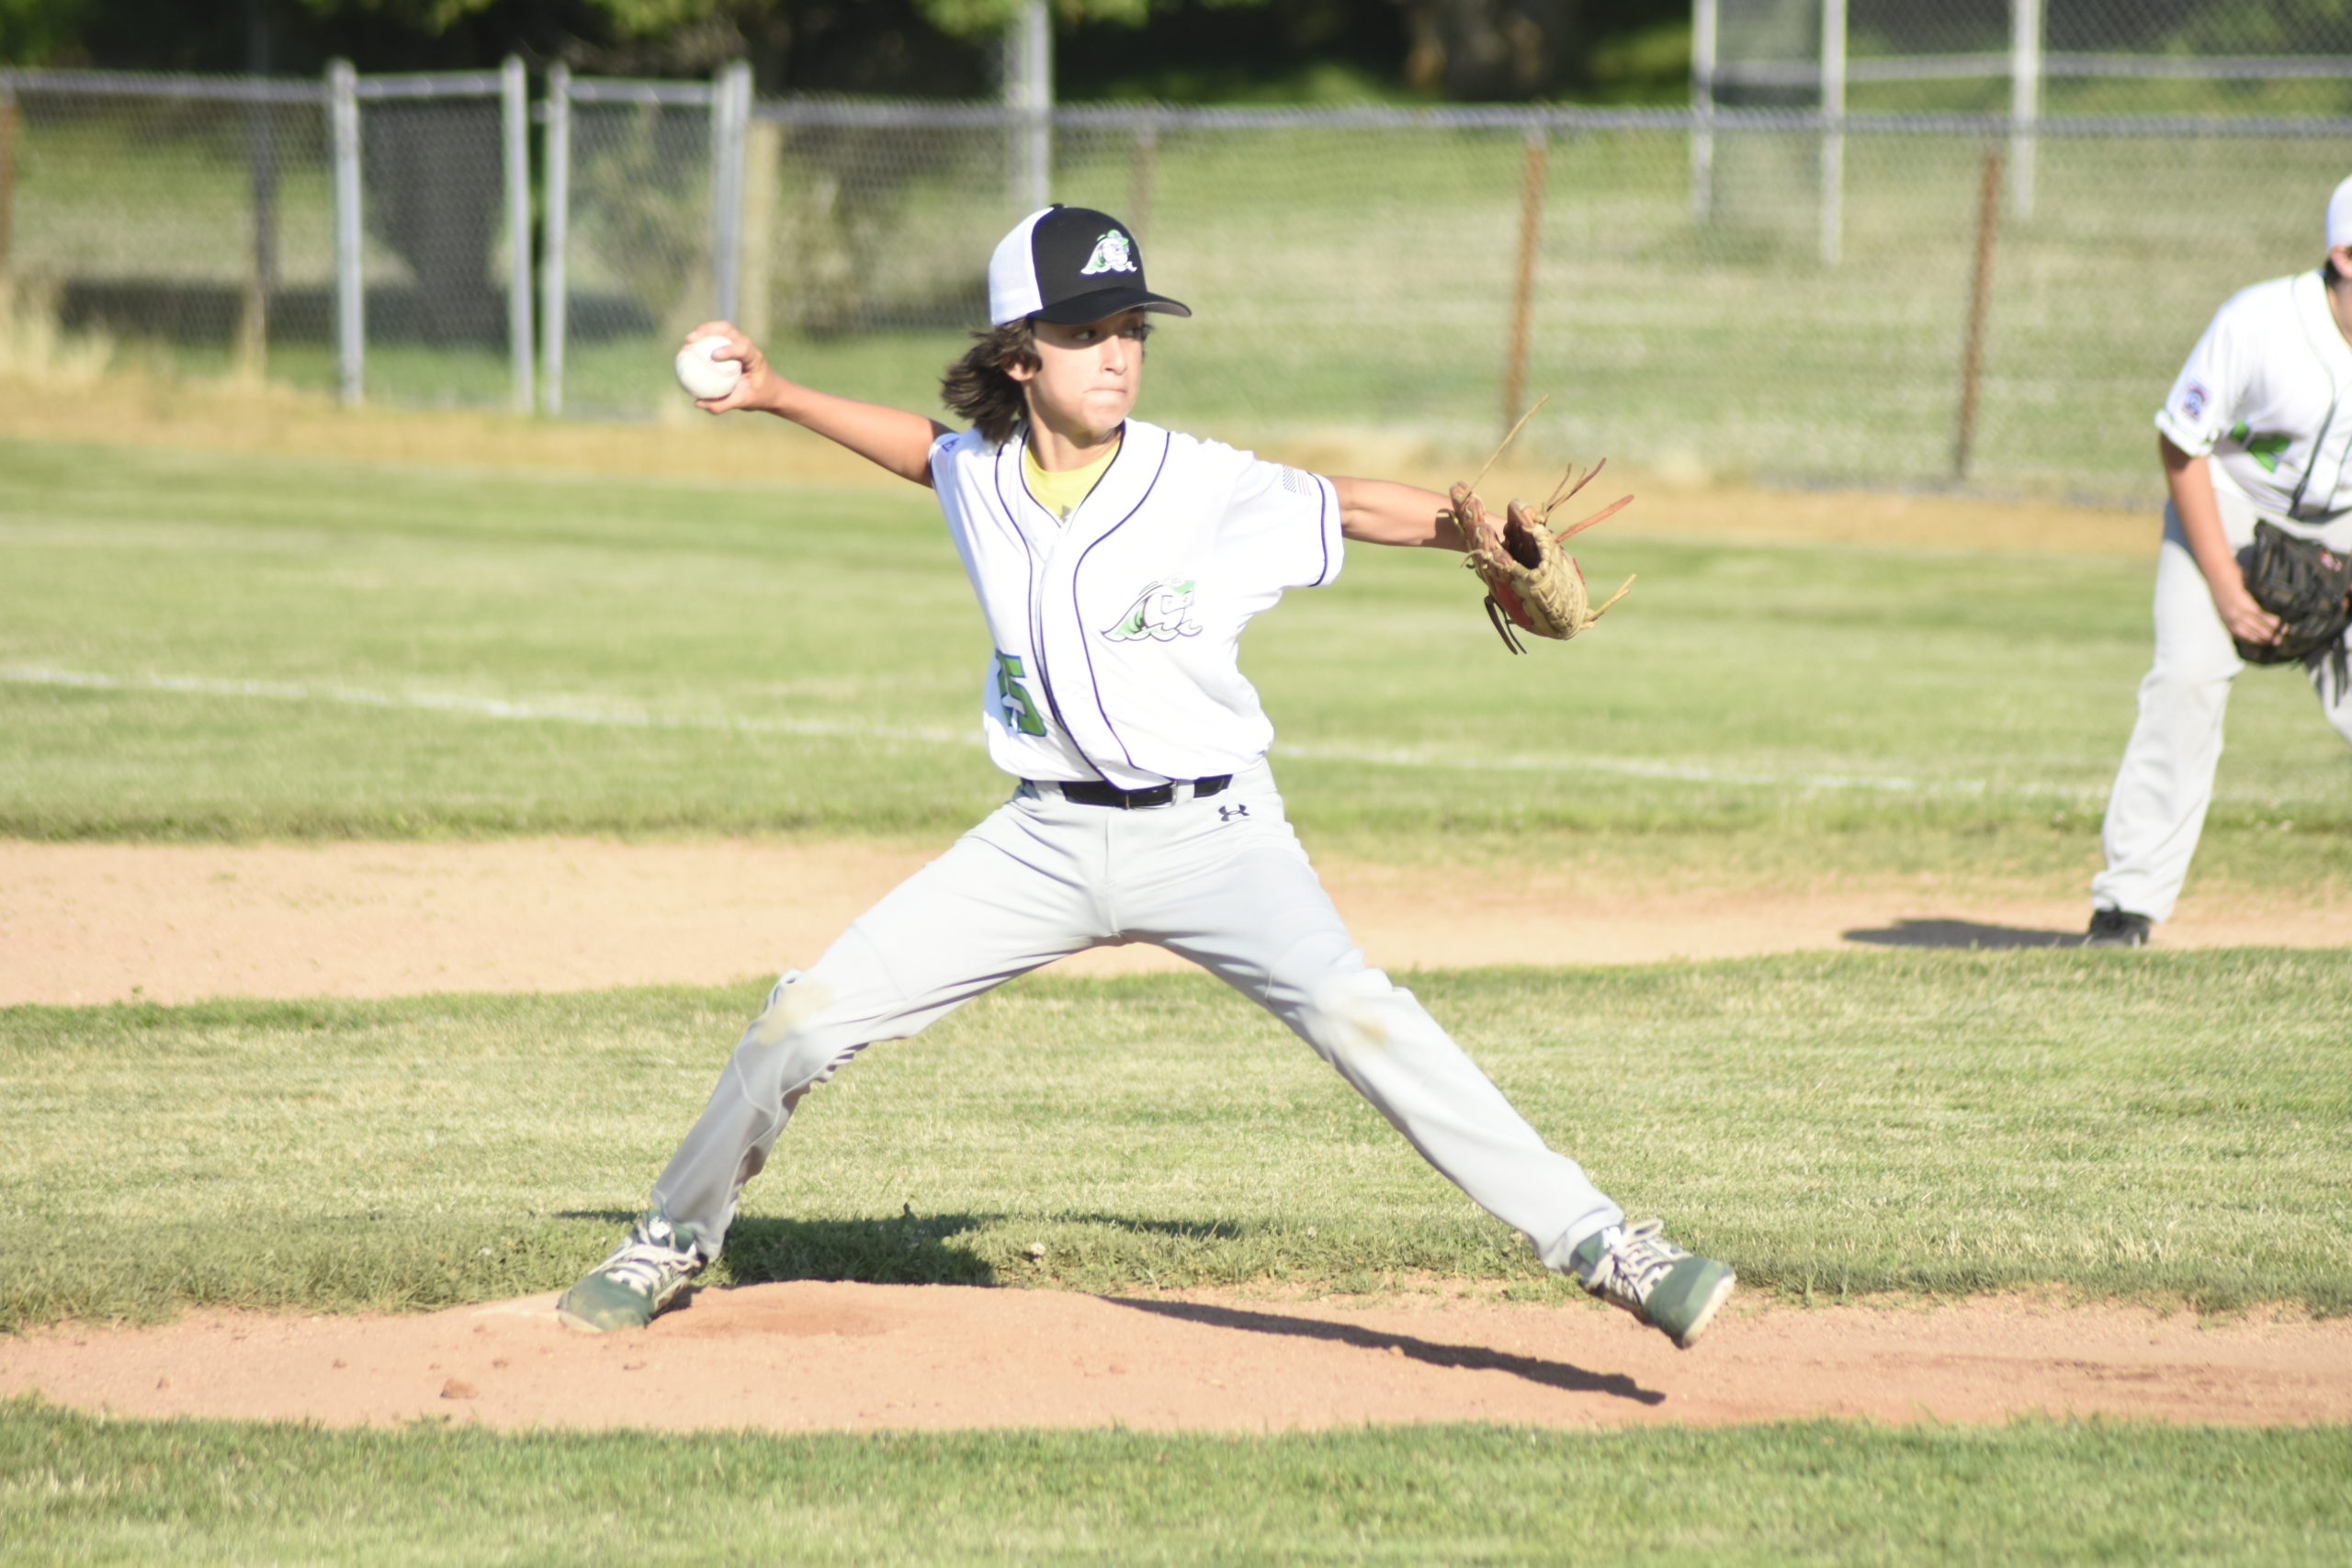 Brady Hudson was strong on the mound for East End in its victory over Southampton last week.